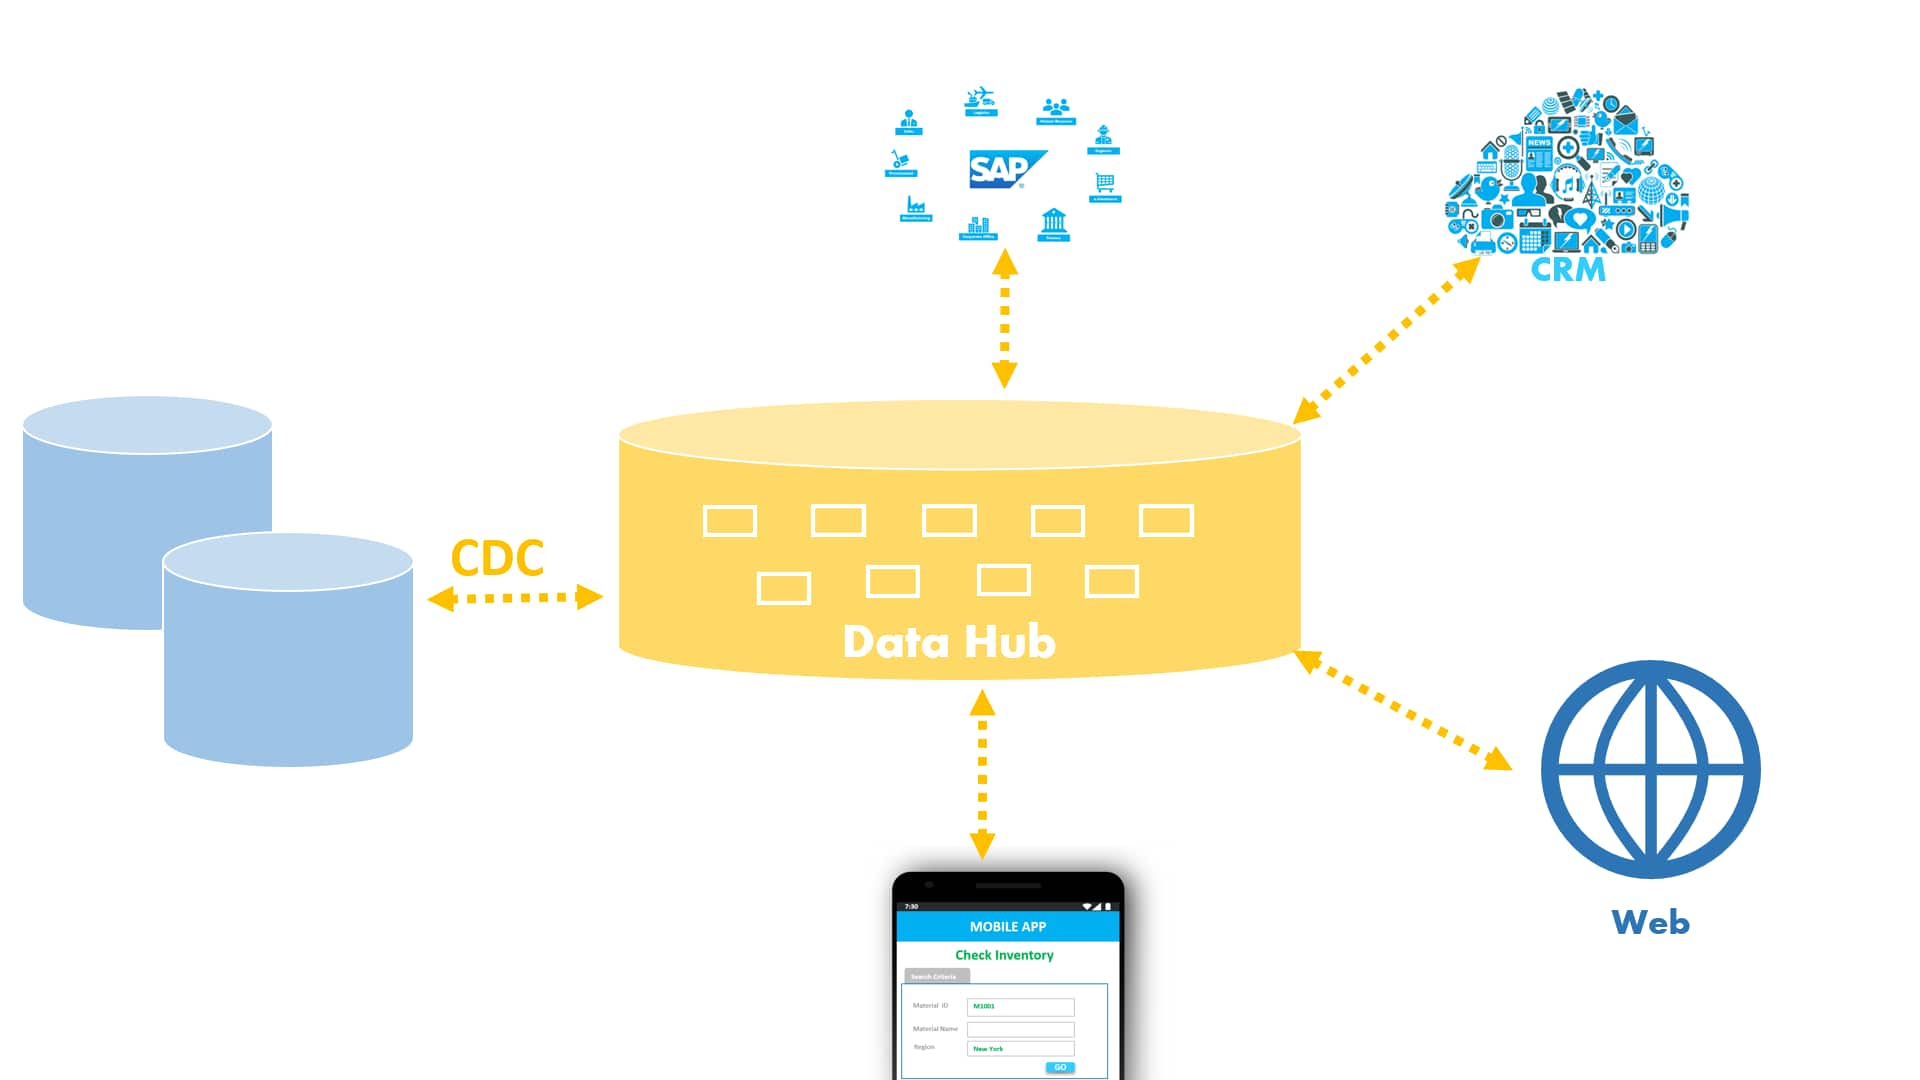 Real-time exchanges in a Data Hub Architecture with CDC by Stambia